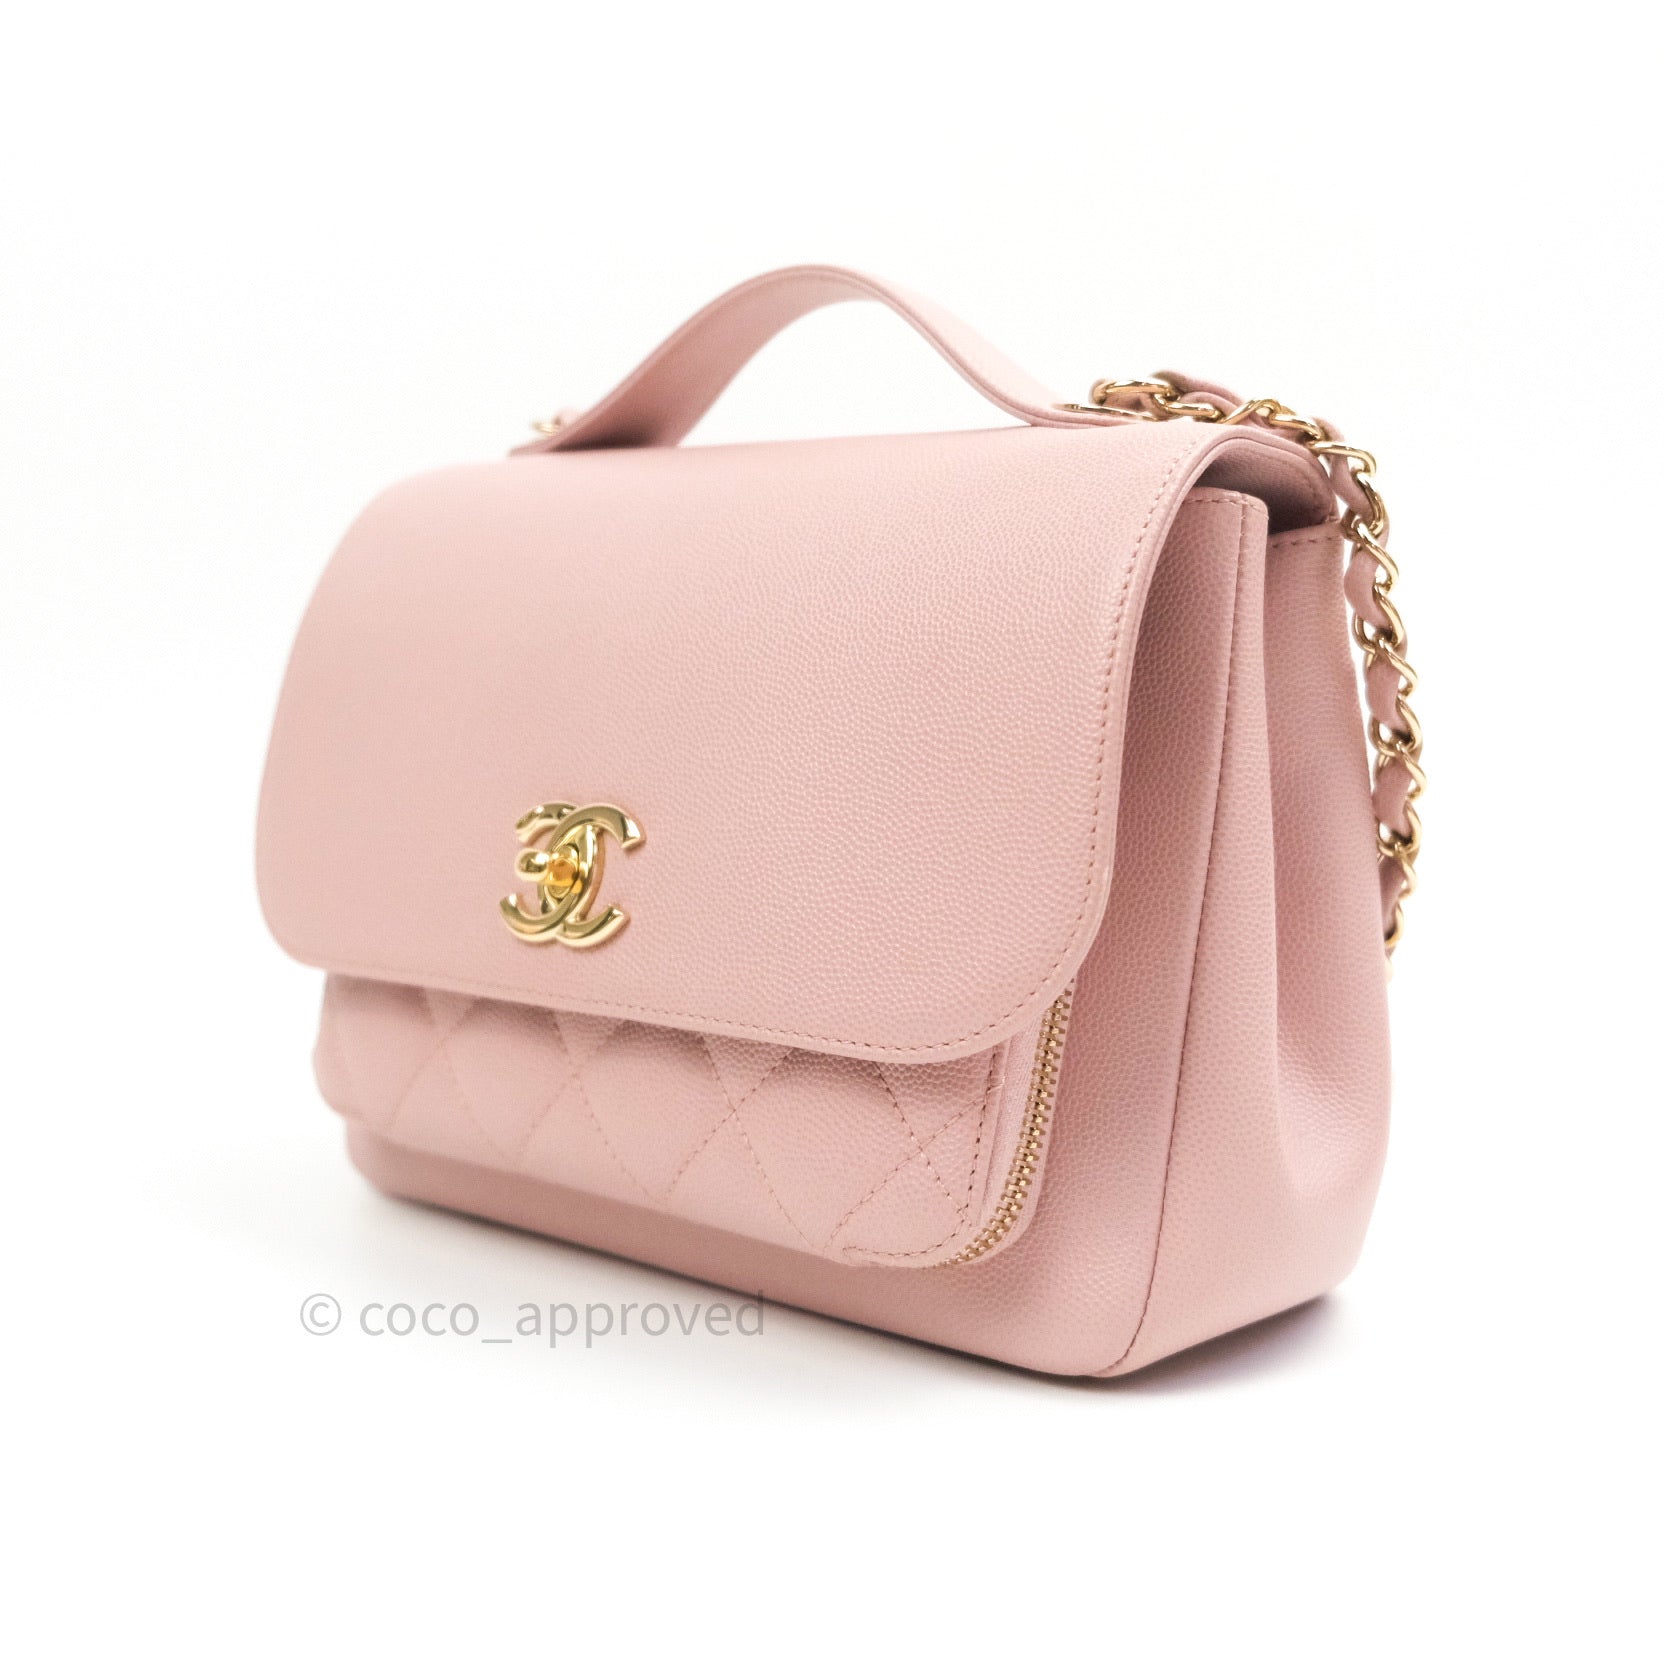 Business affinity leather handbag Chanel Pink in Leather - 35322186